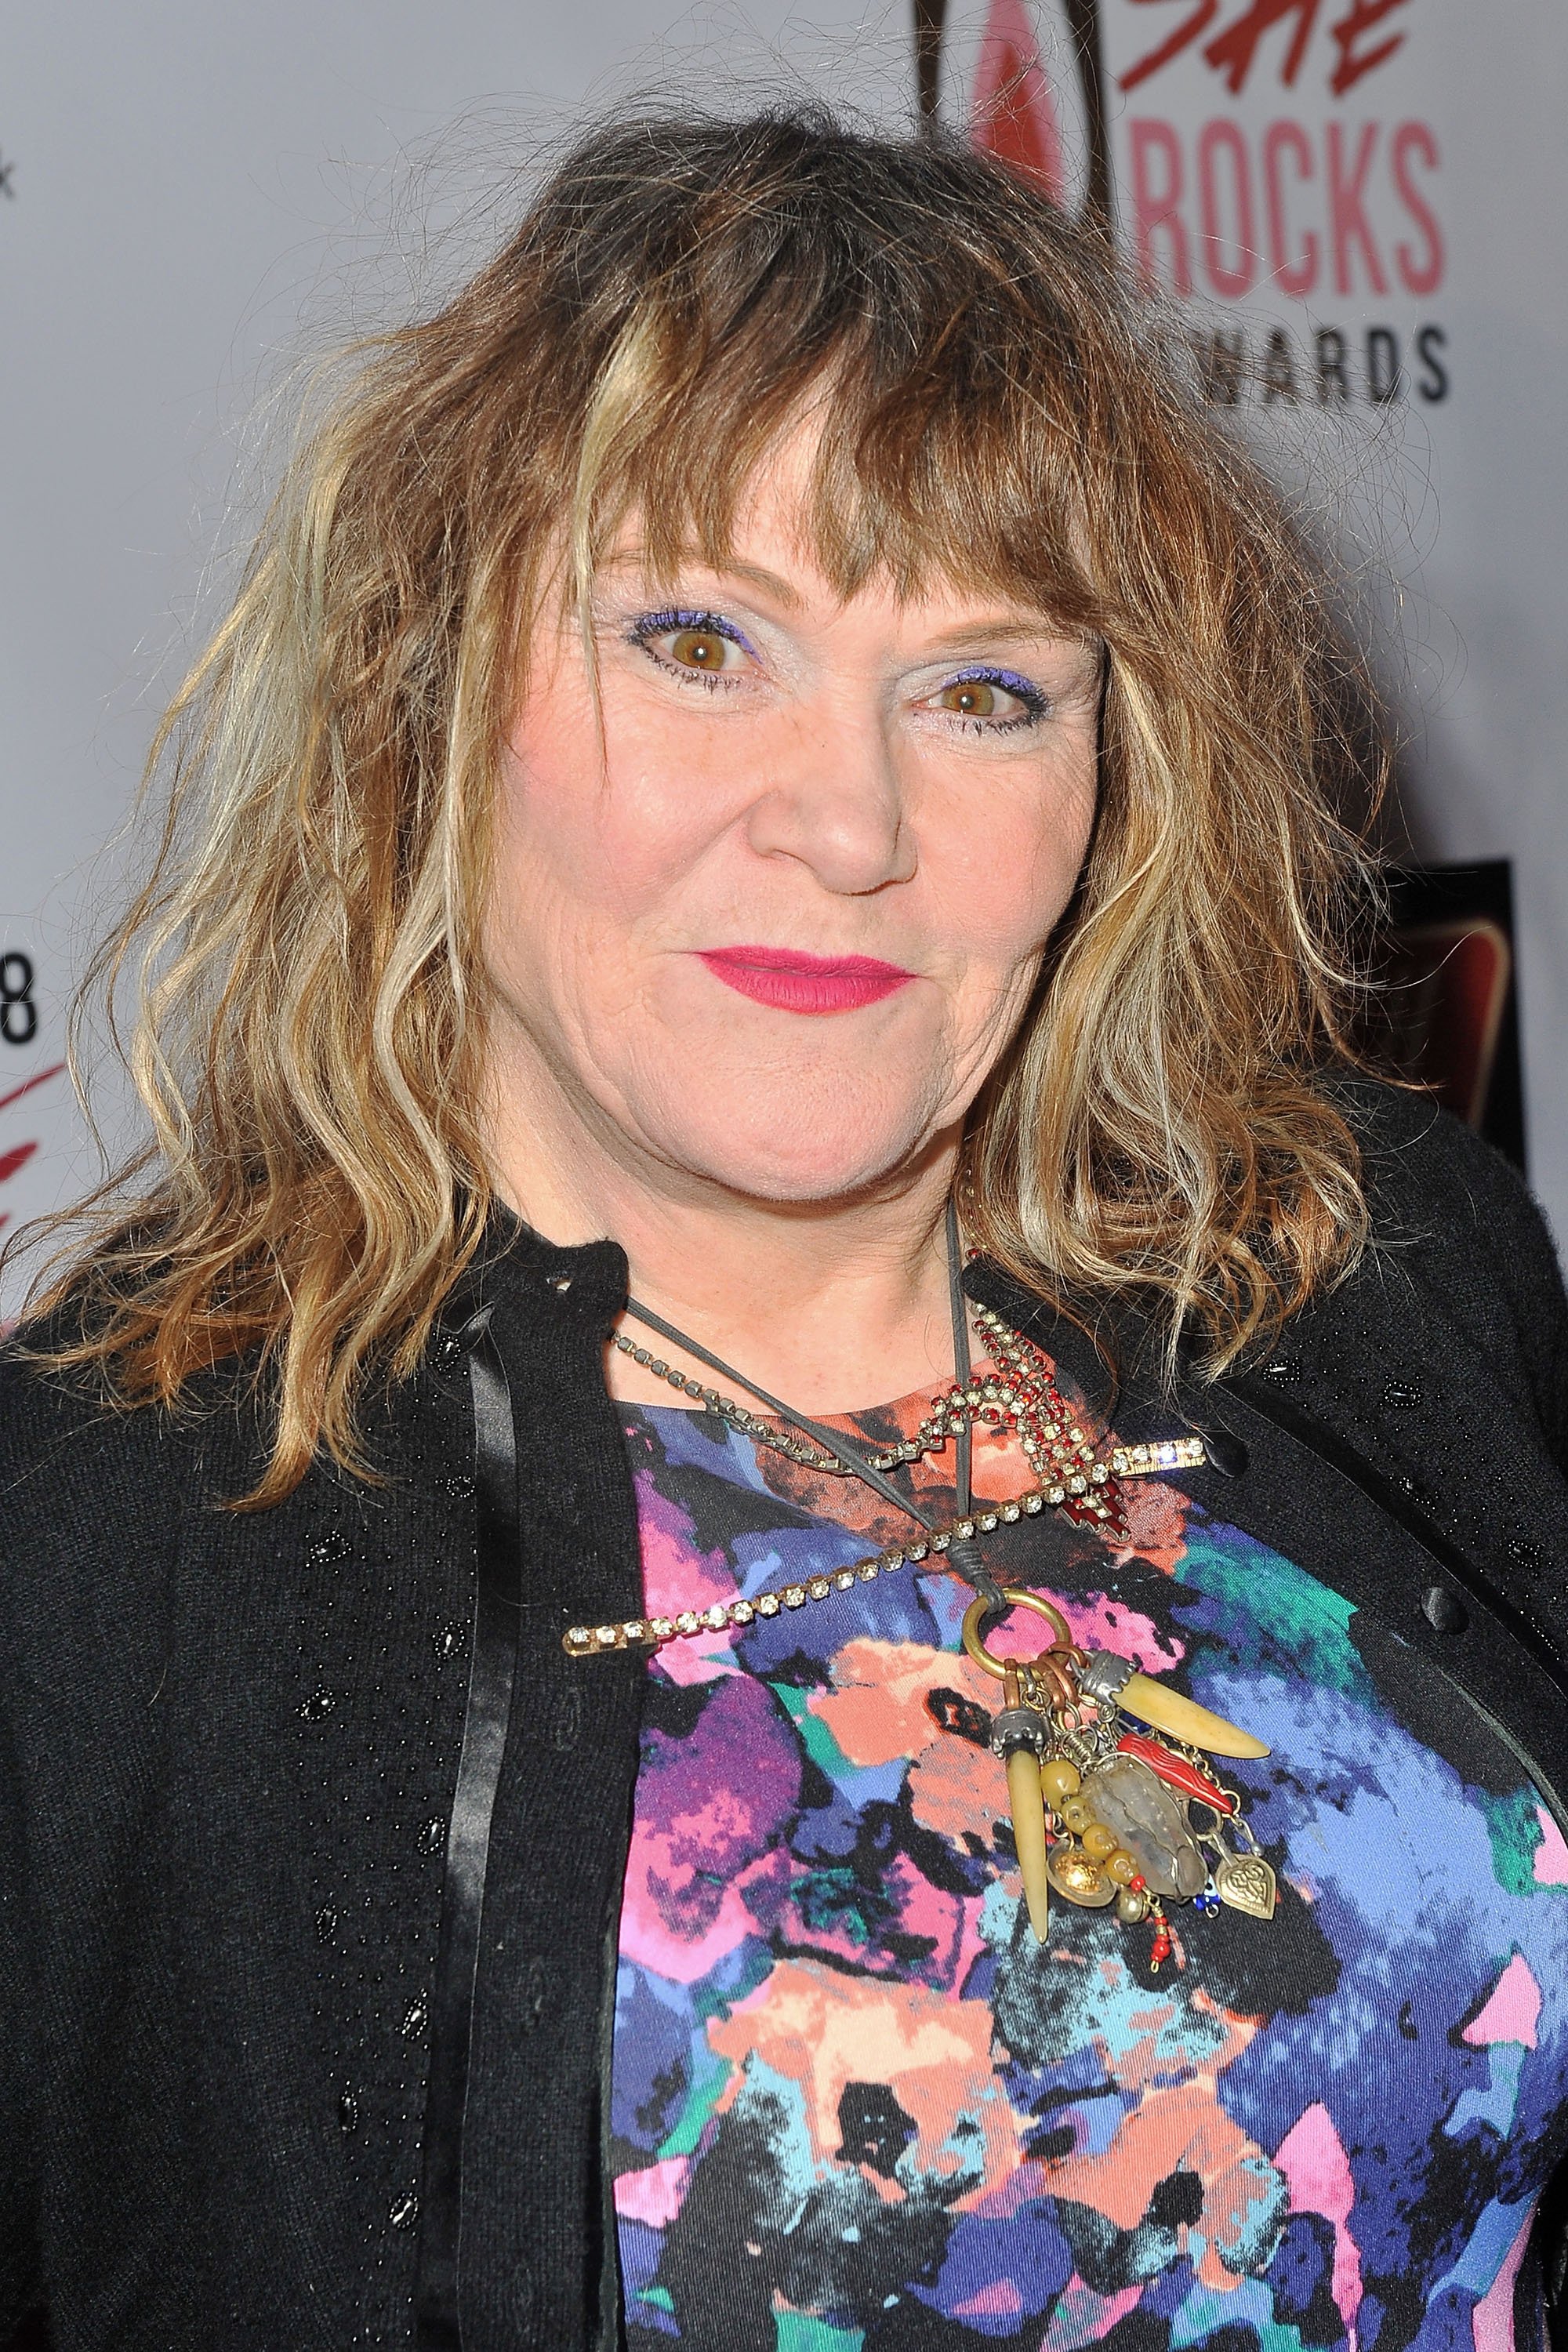 Singer/songwriter Exene Cervenka arrives at 6th Annual She Rocks Awards on January 26, 2018, in Anaheim, California. | Source: Getty Images